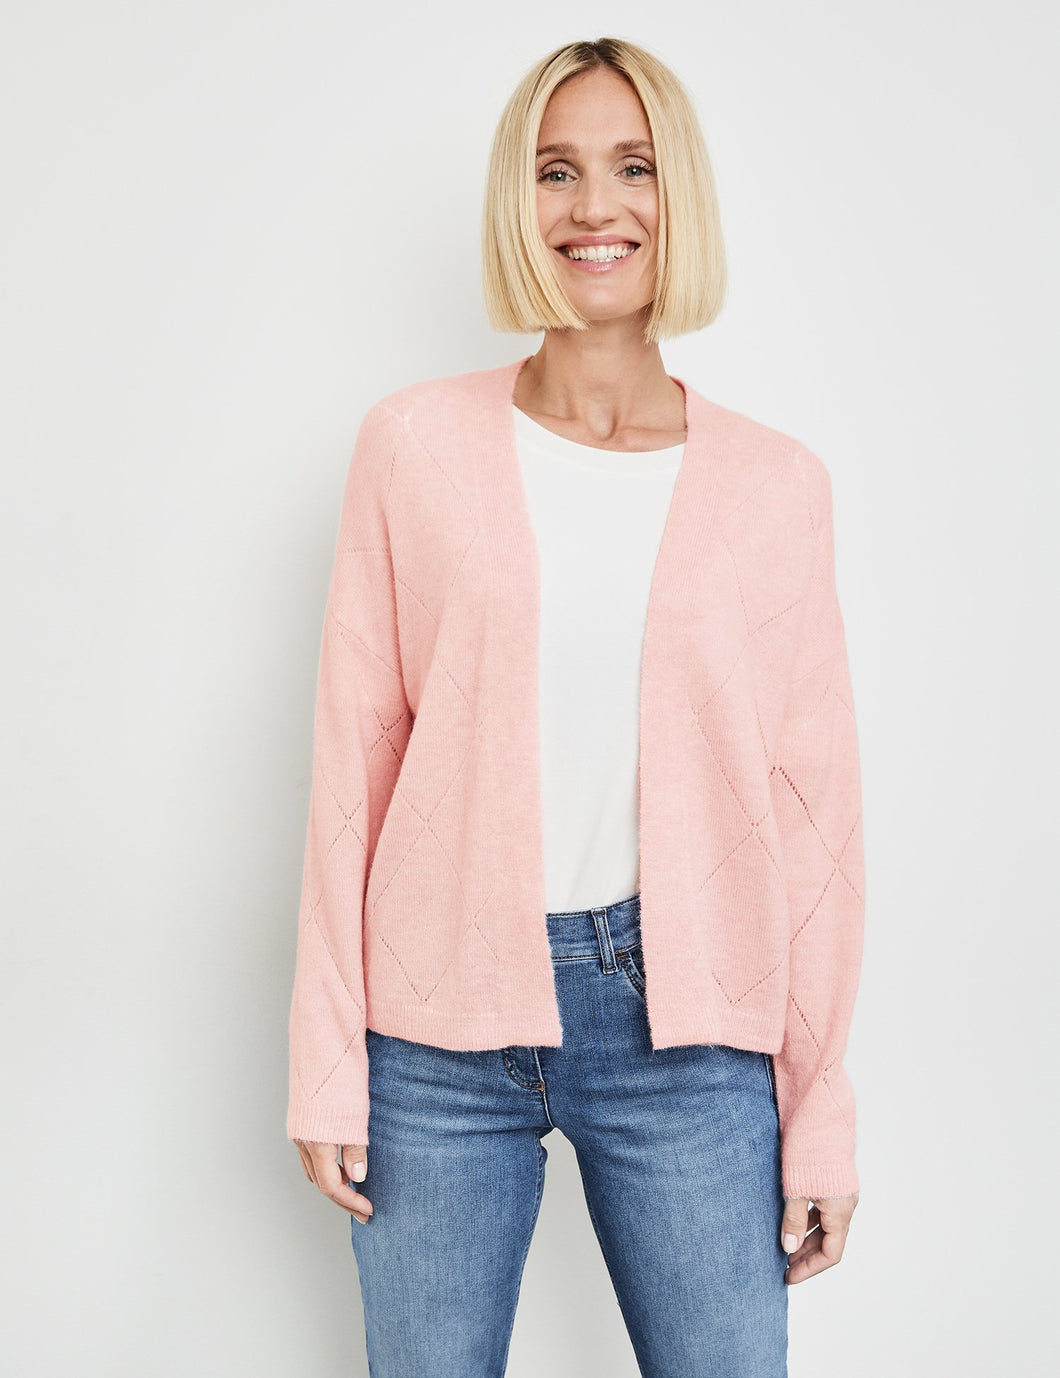 Cardigan with Textured Details